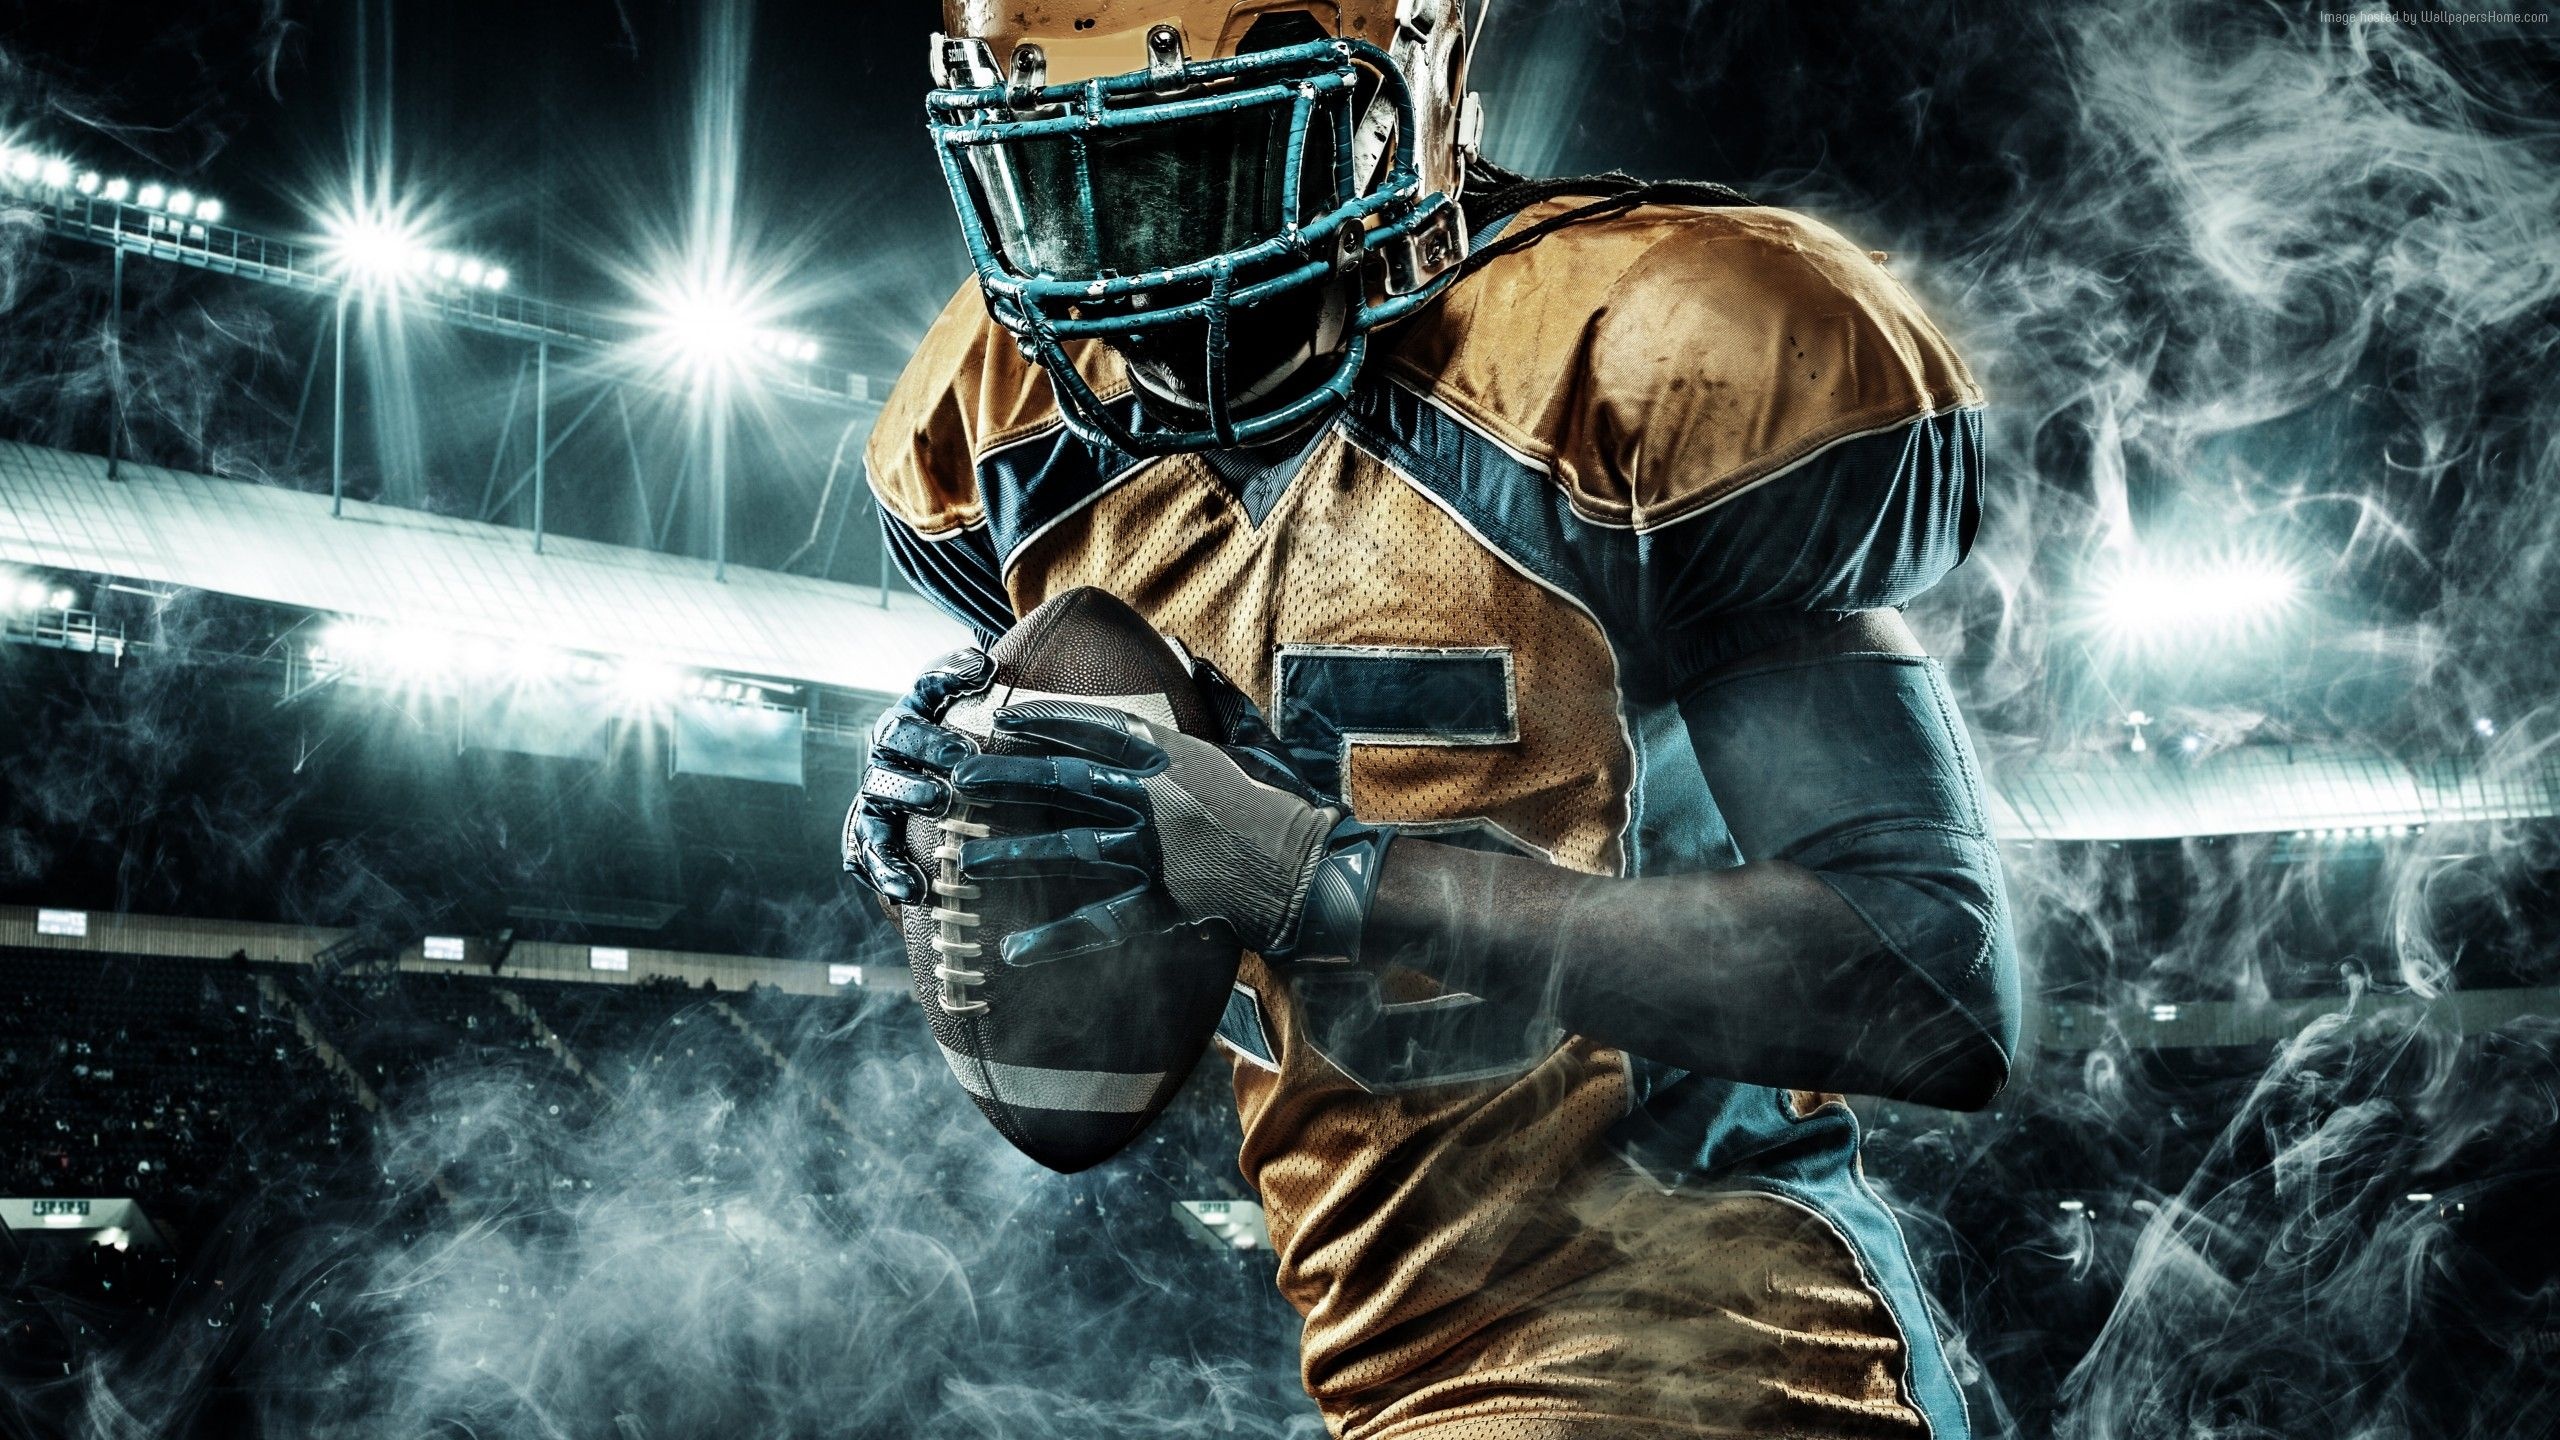 American Football: The most popular forms of the game are professional and college. 2560x1440 HD Wallpaper.